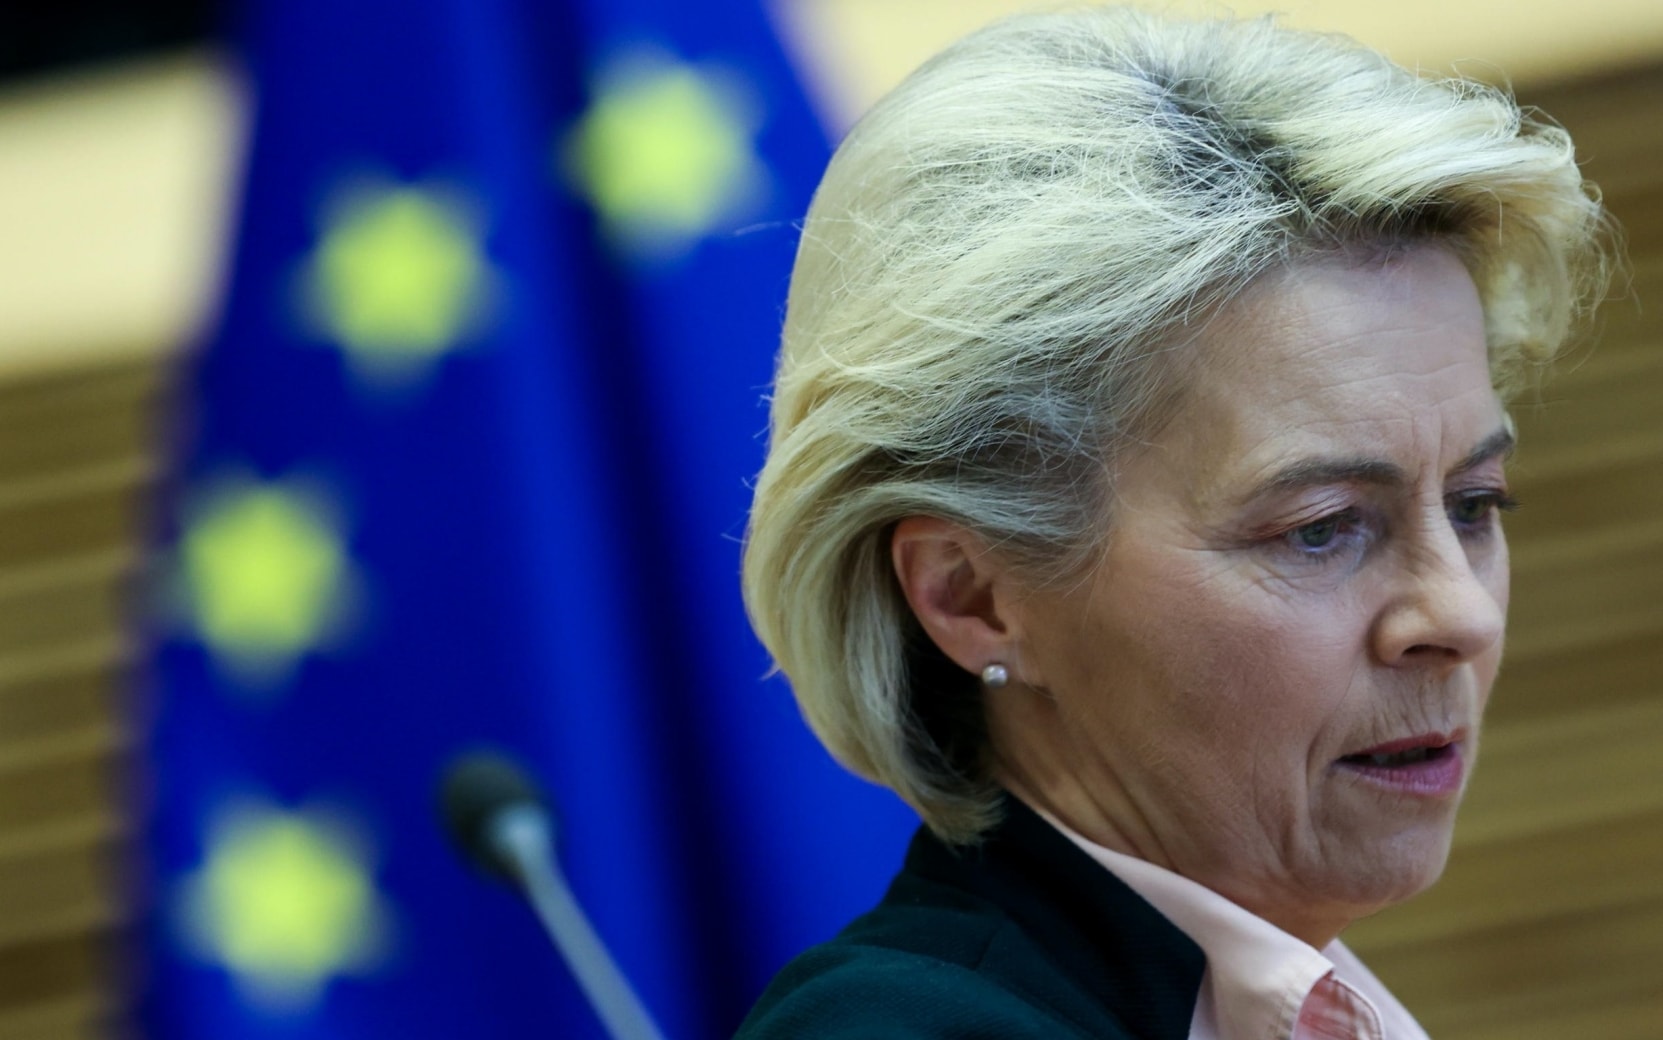 Von der Leyen: “Italy’s economy is growing like never before”